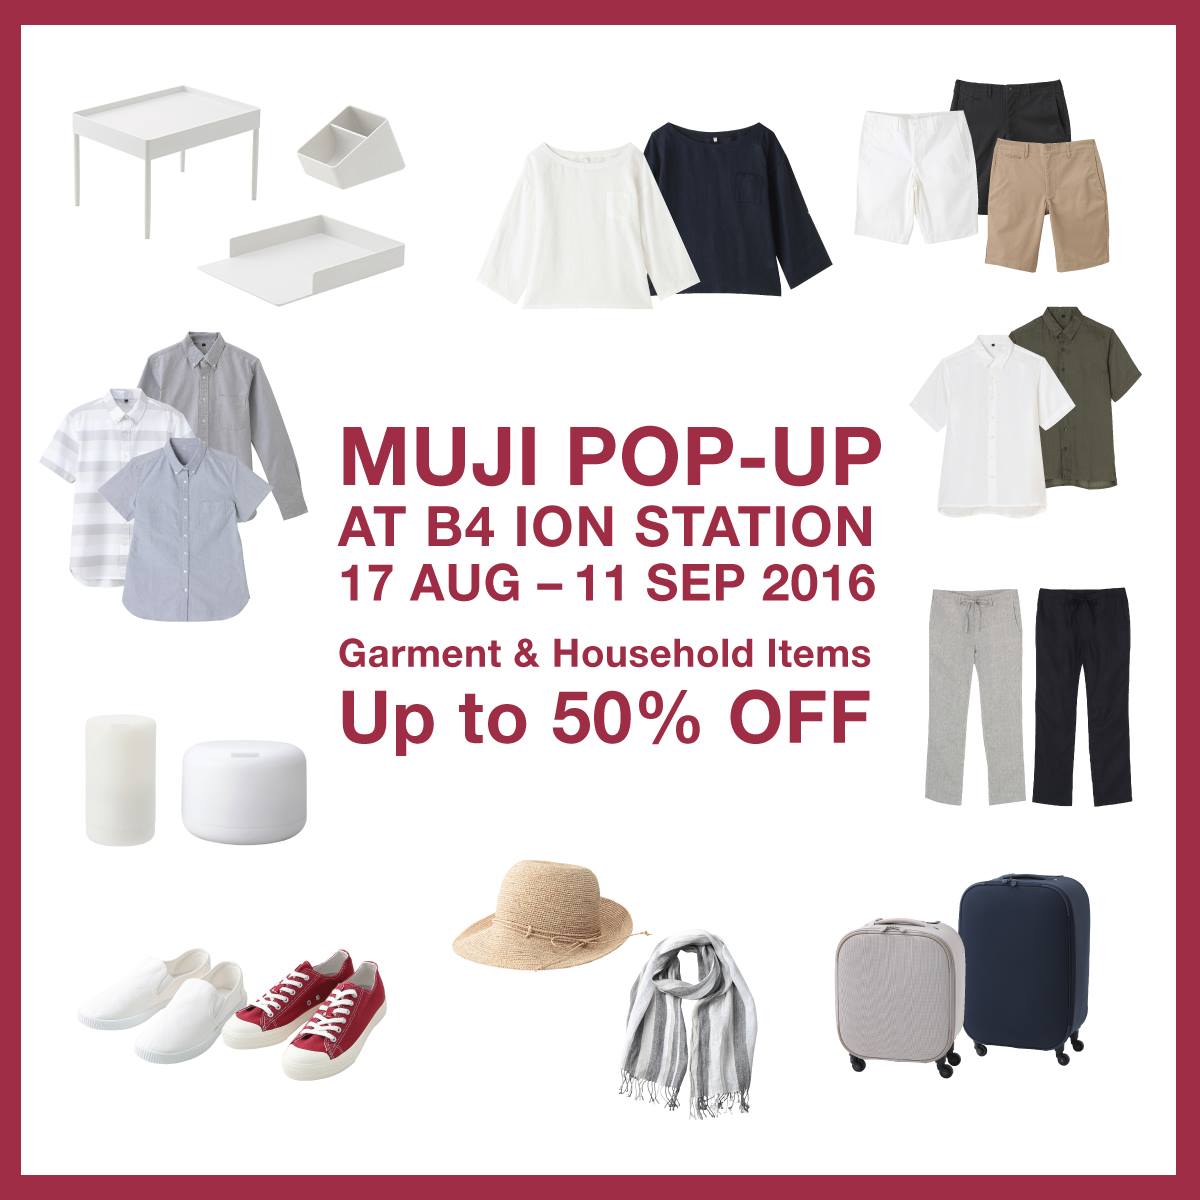 MUJI Singapore Pop-up B4 ION Station Up to 50% Off 17 Aug to 11 Sep 2016